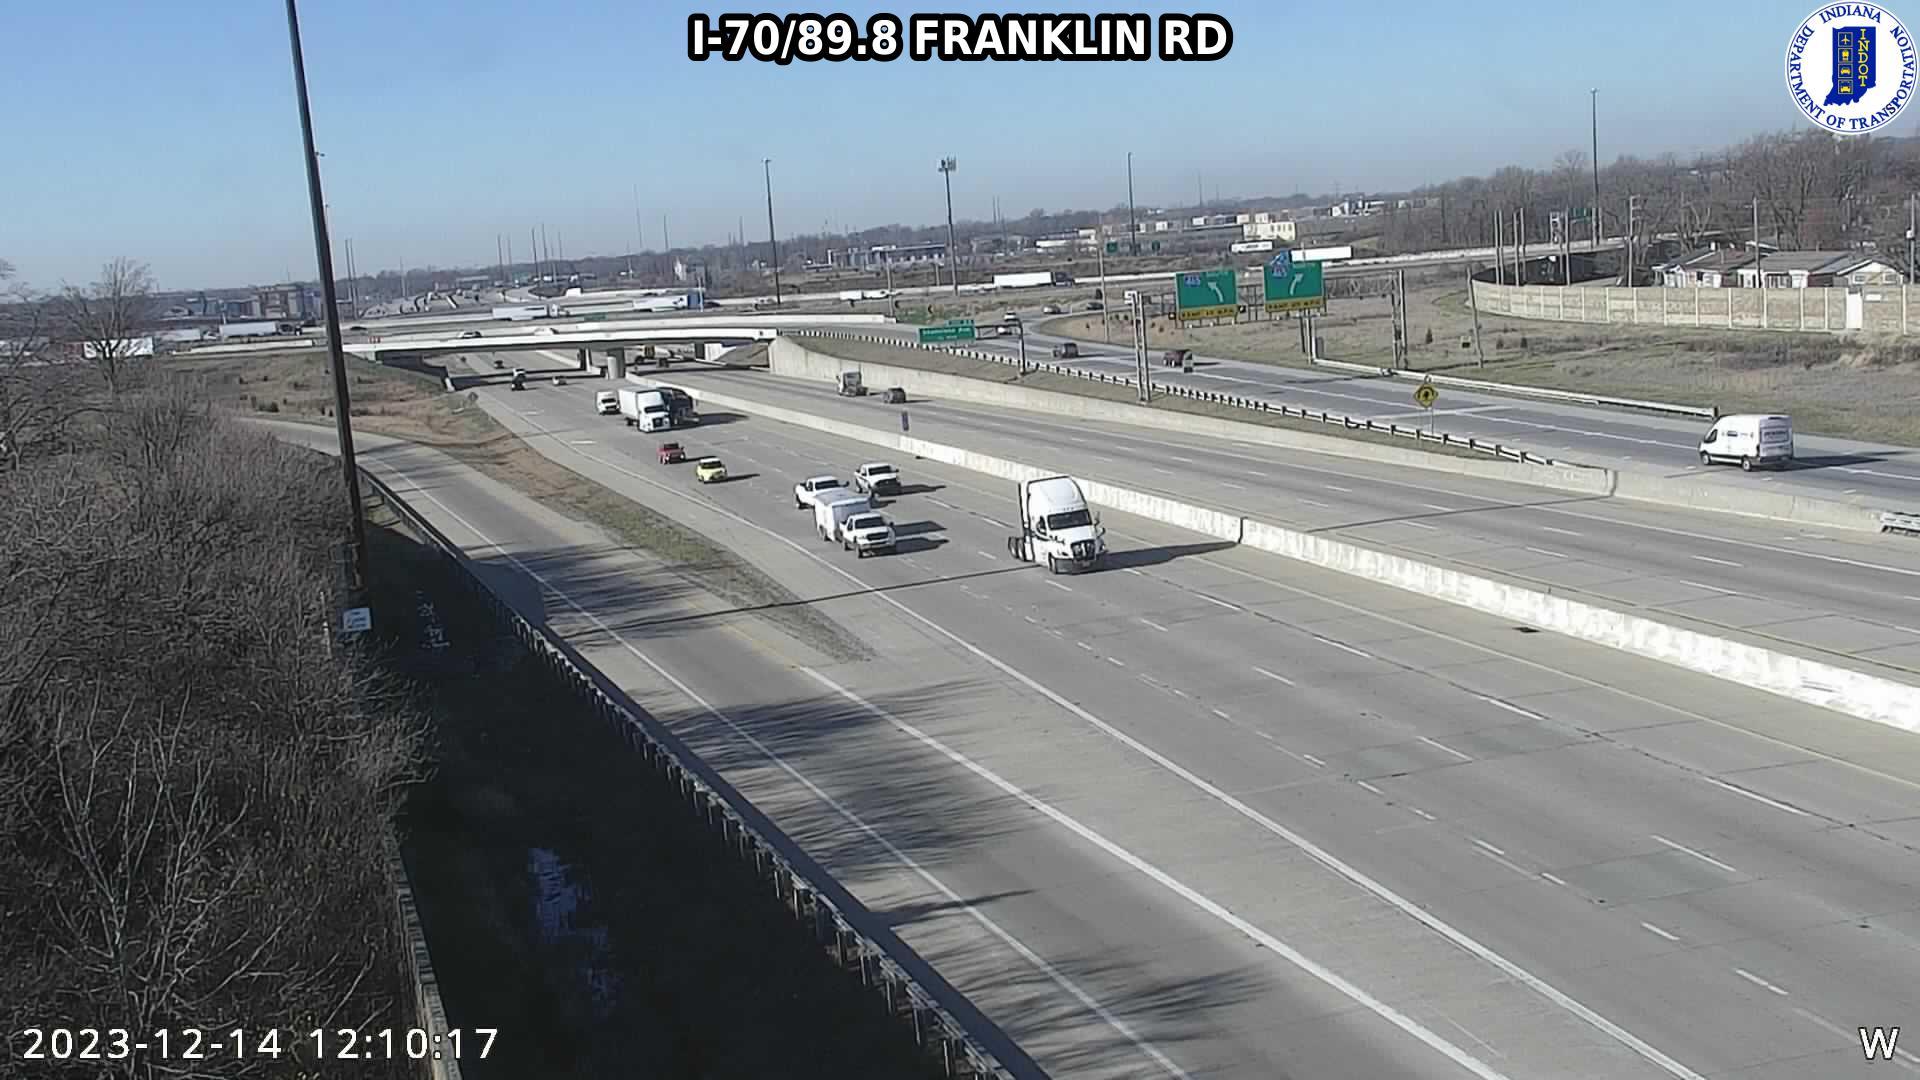 Traffic Cam Indianapolis: I-70: I-70/89.8 FRANKLIN RD Player